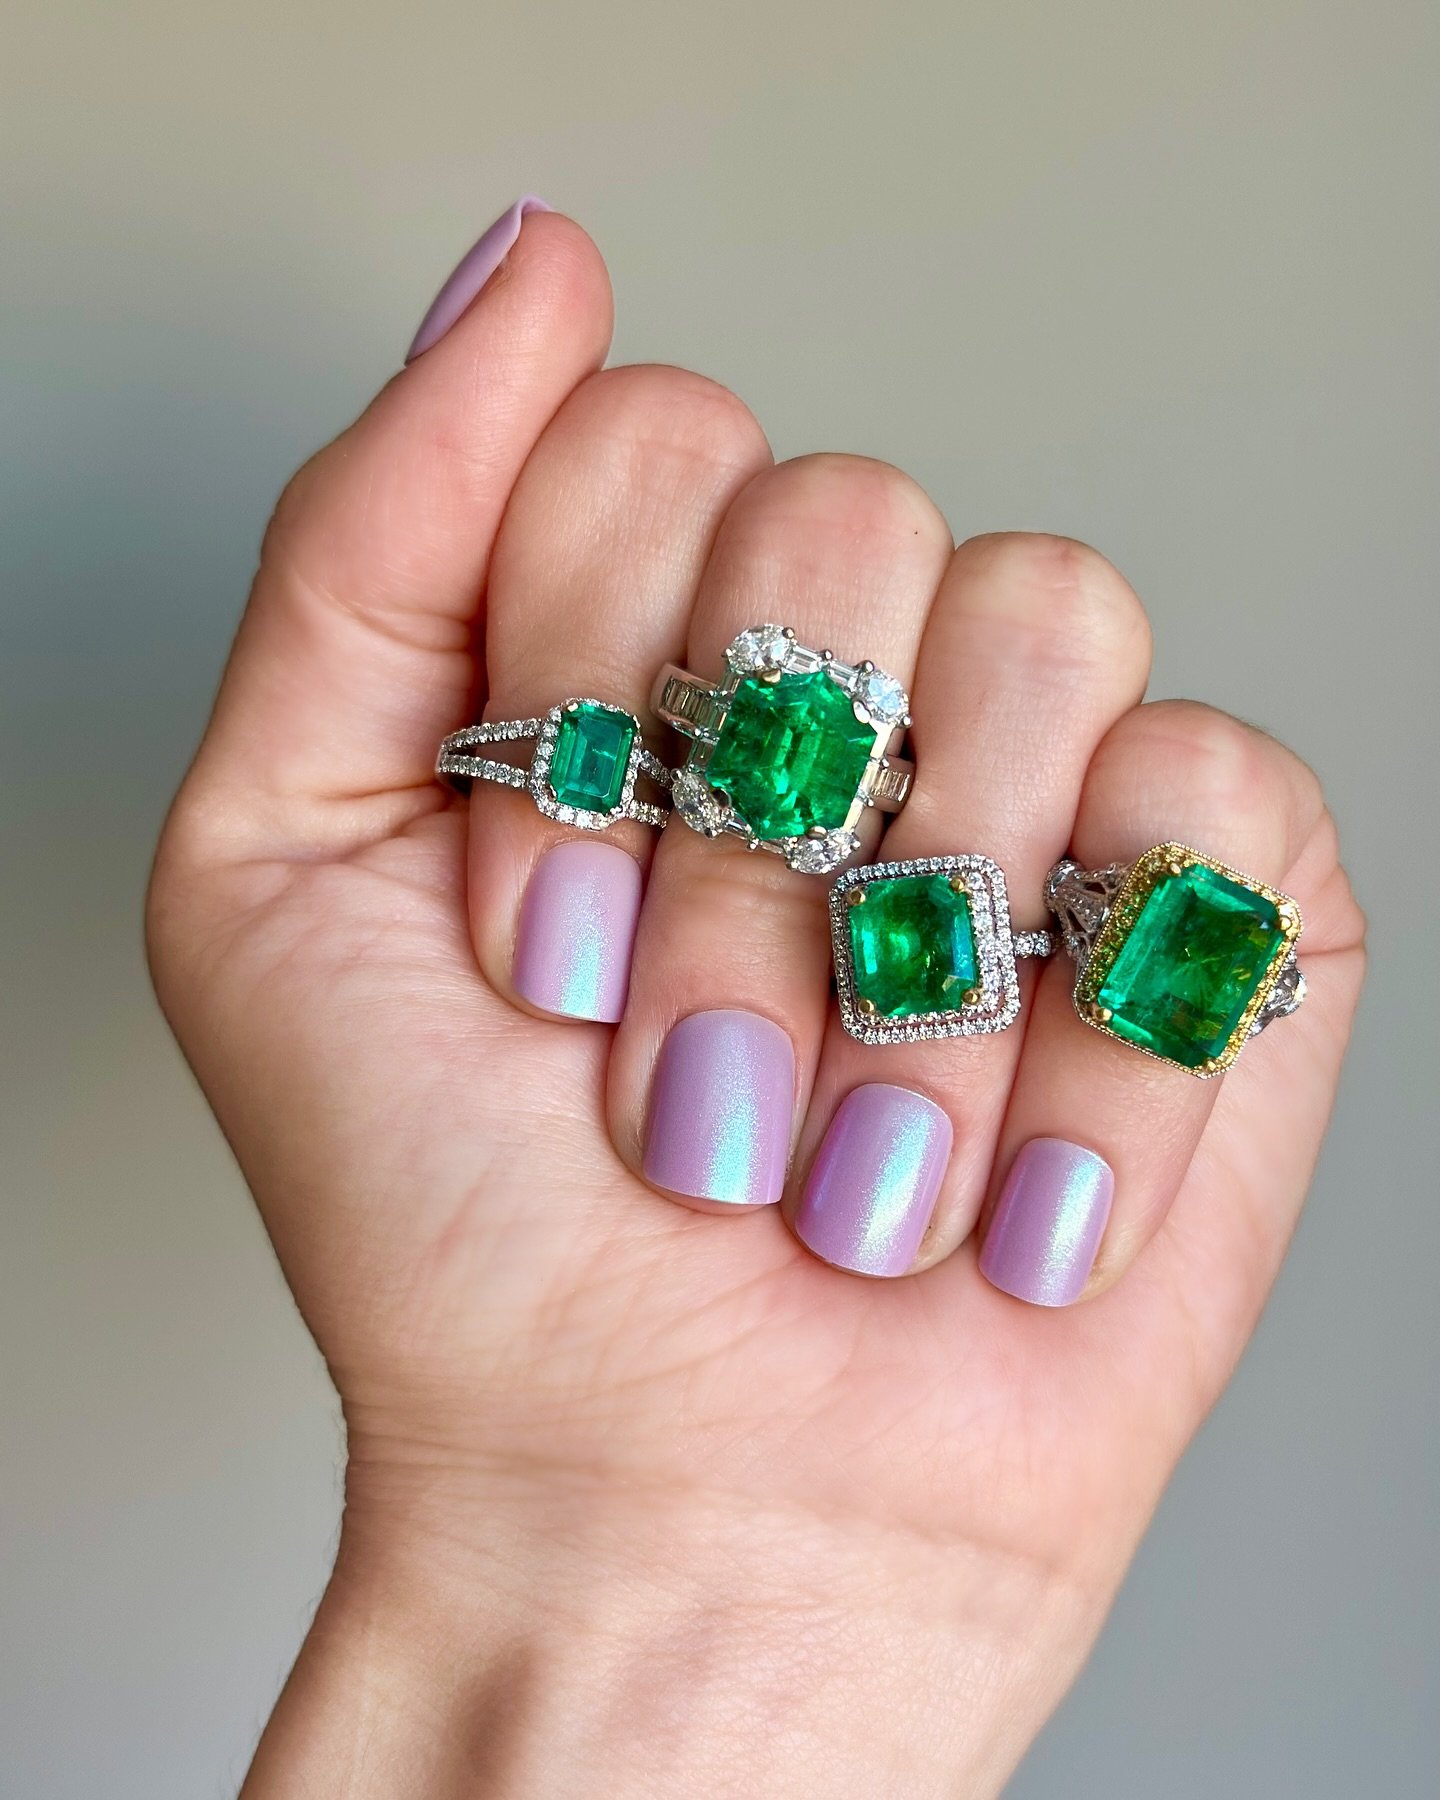 The elegant emerald- May&rsquo;s birthstone 💚

Who here is born in May? This one&rsquo;s for you. Emerald is known to be May&rsquo;s birthstone because the rich green color. 

This stone represents the growth, health, prosperity, and fertility of sp